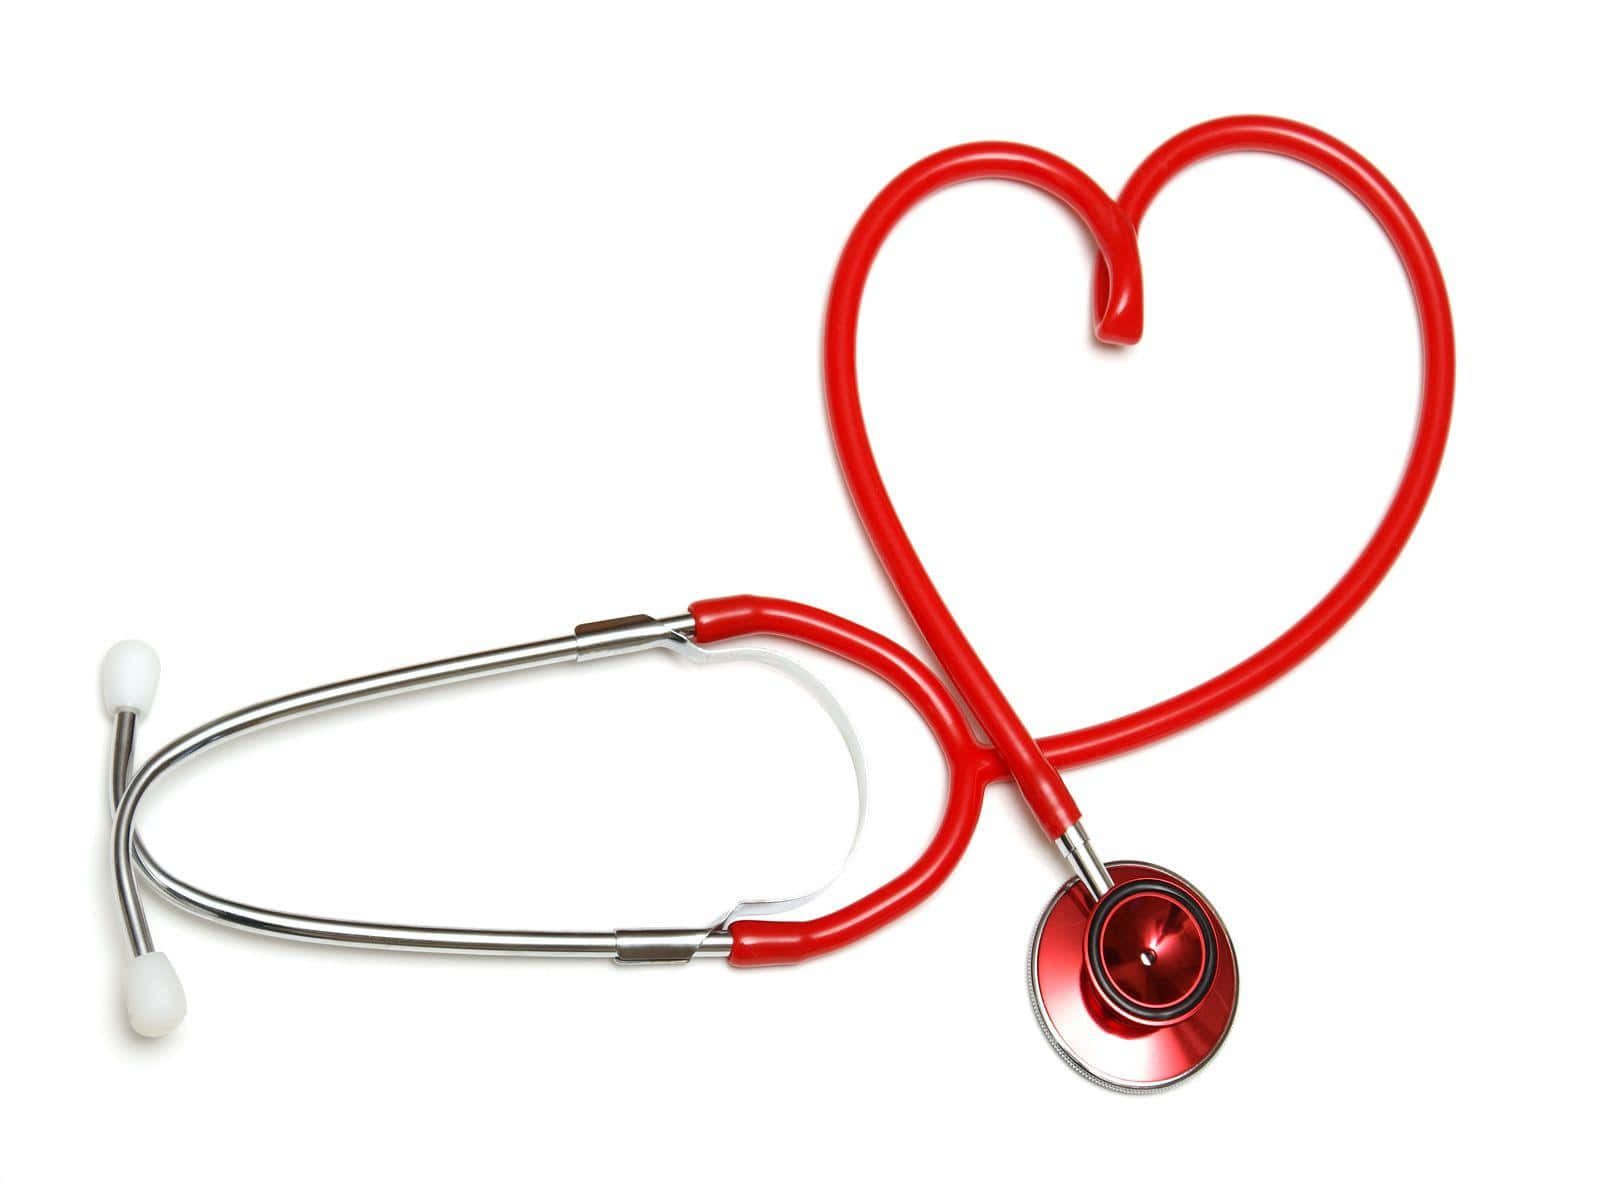 A Red Heart Shaped Stethoscope On A White Background